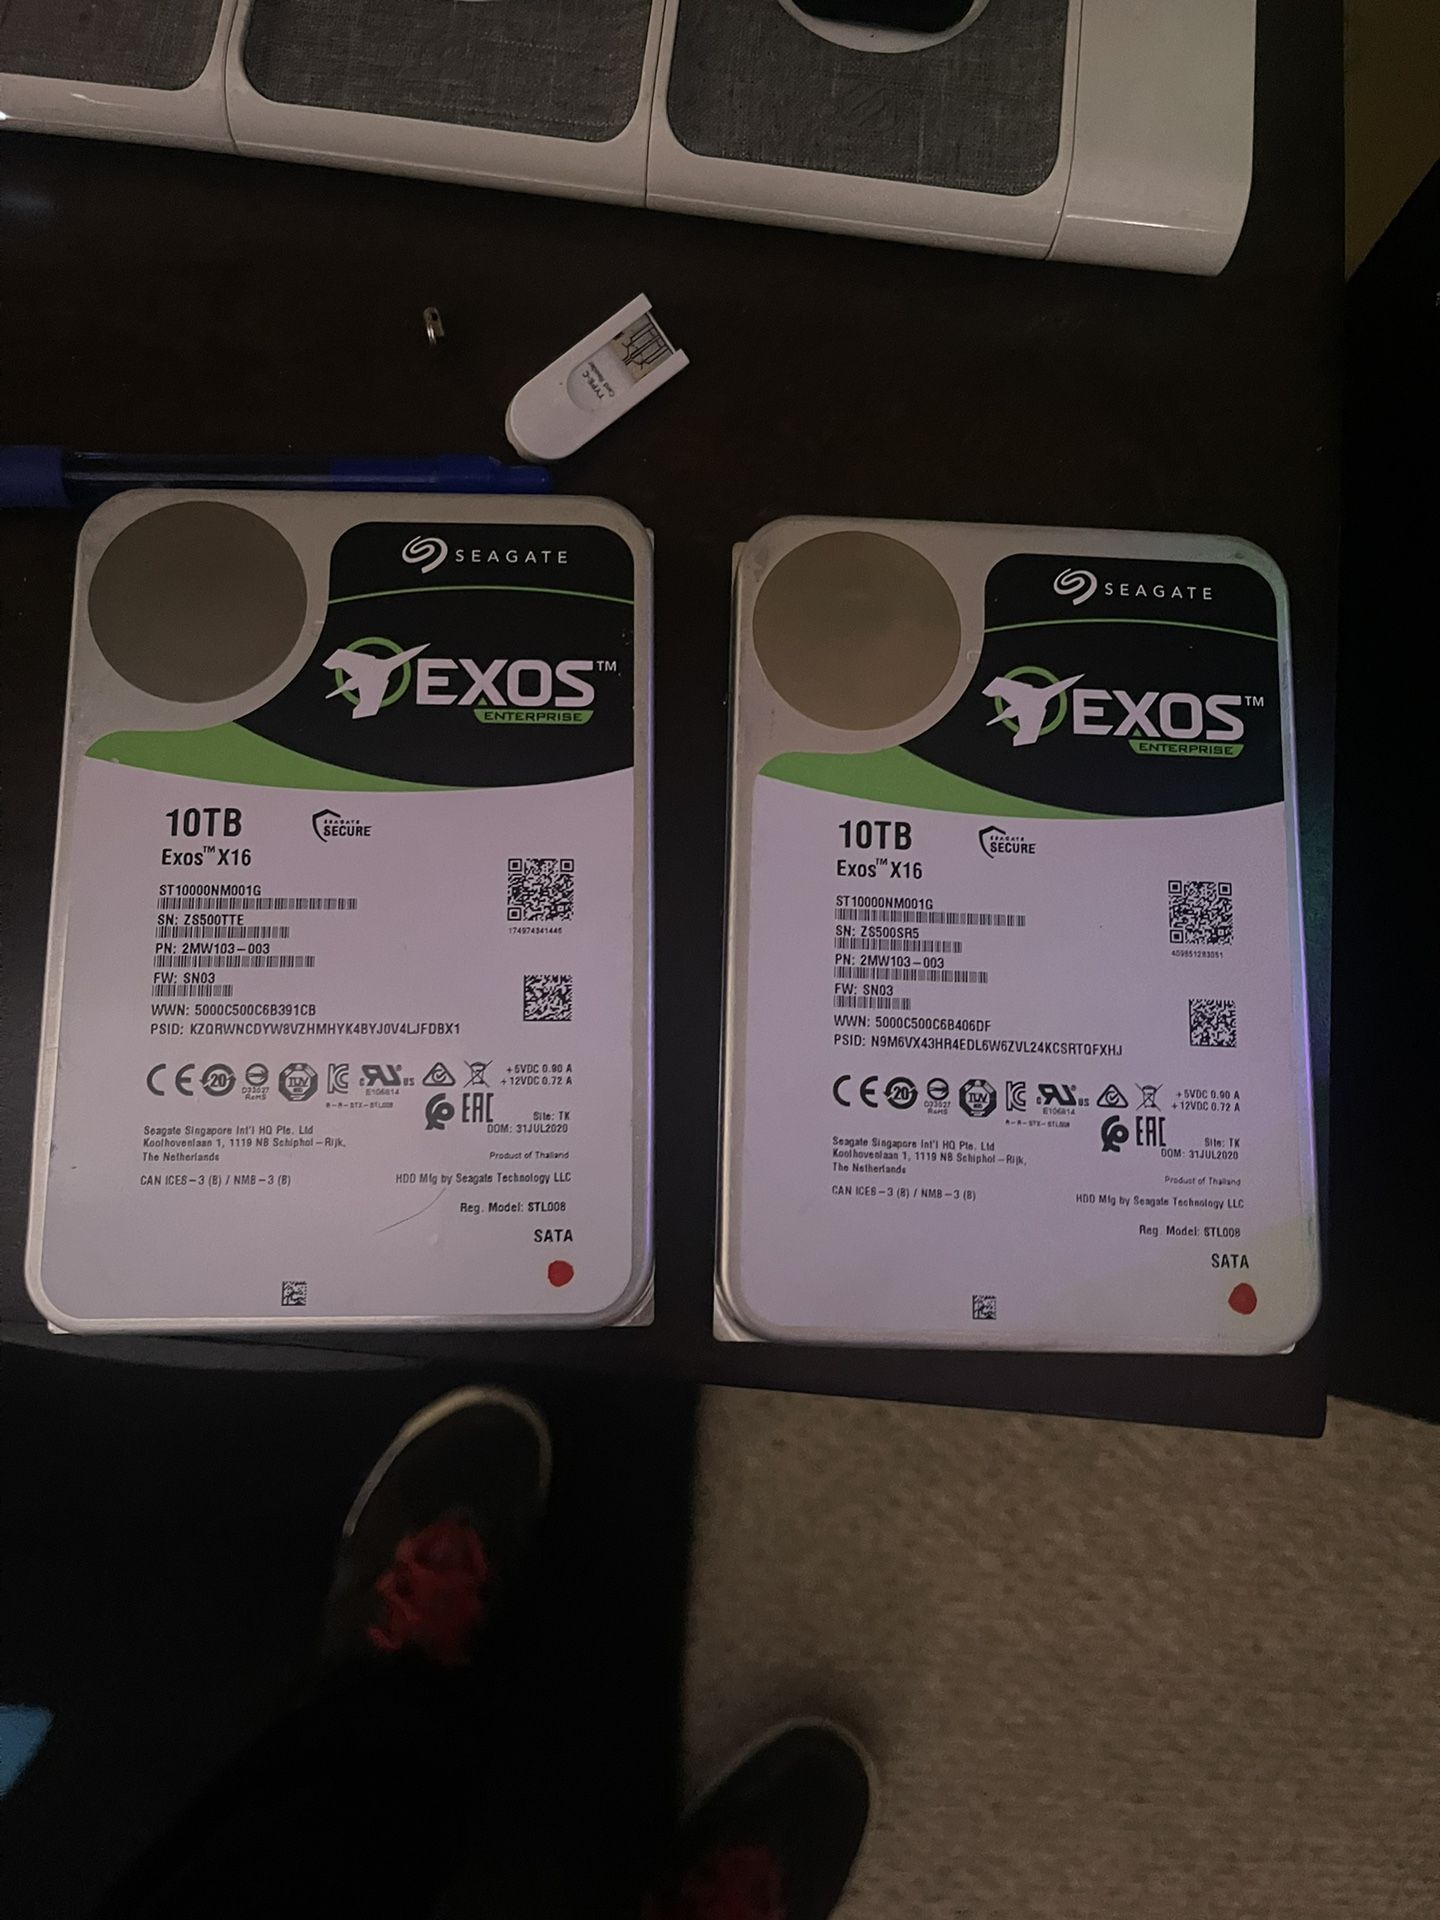 10TB Exos X16 Hard Drive (Price Is For One)